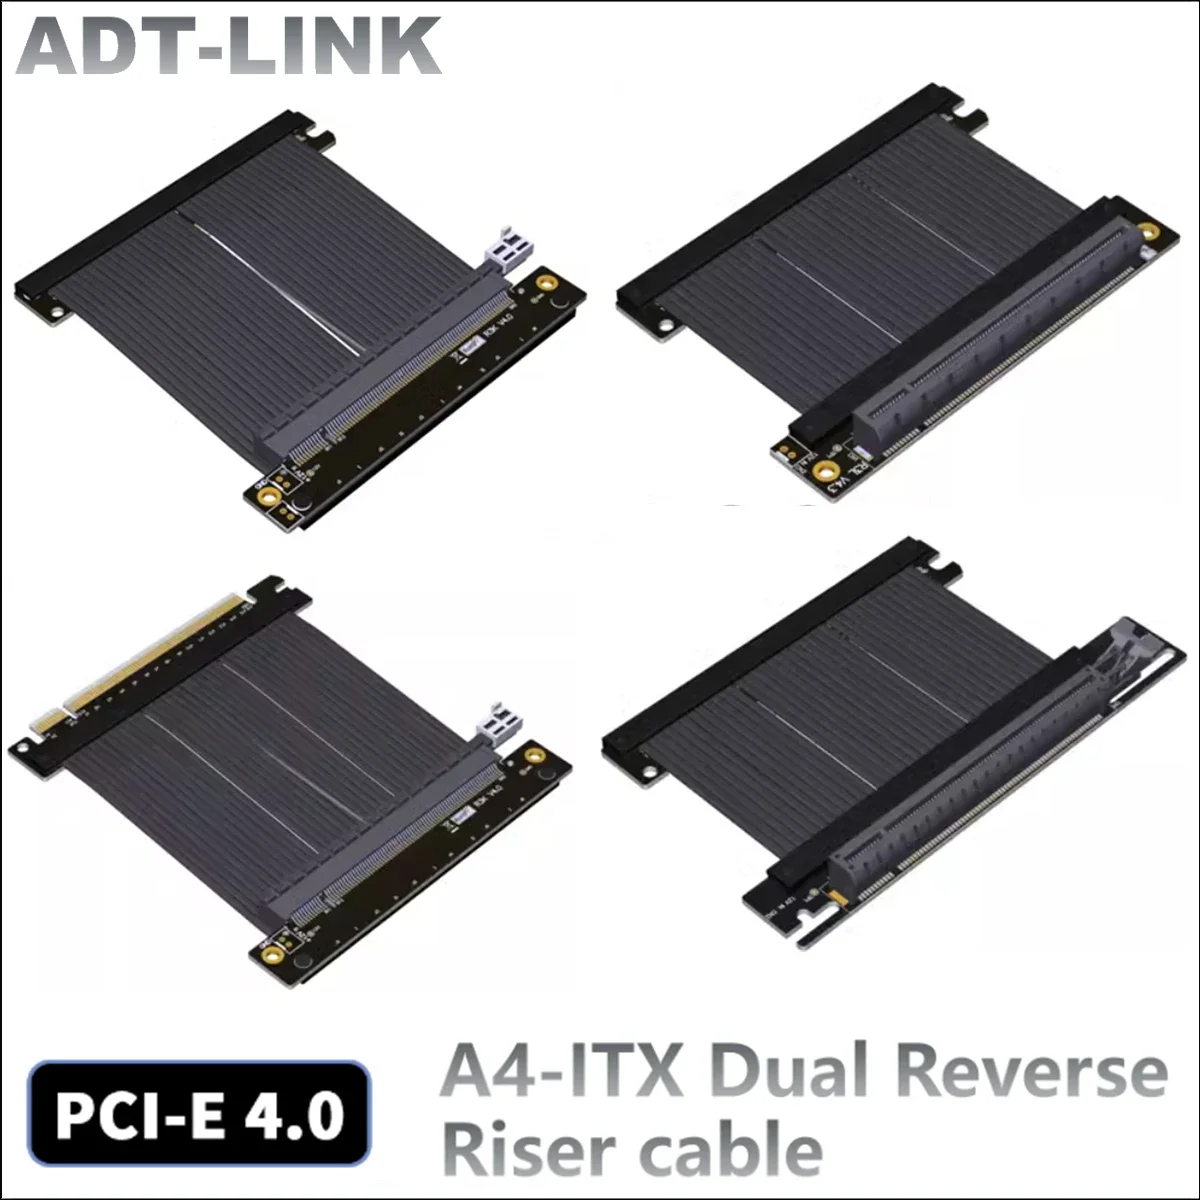 

ADT-Link Riser PCI-E 4.0 X16 Riser Cable For RTX3090 PCIE 4.0 Graphics Card Extension Cord ITX A4 Mini Case GPU Extender Adapter